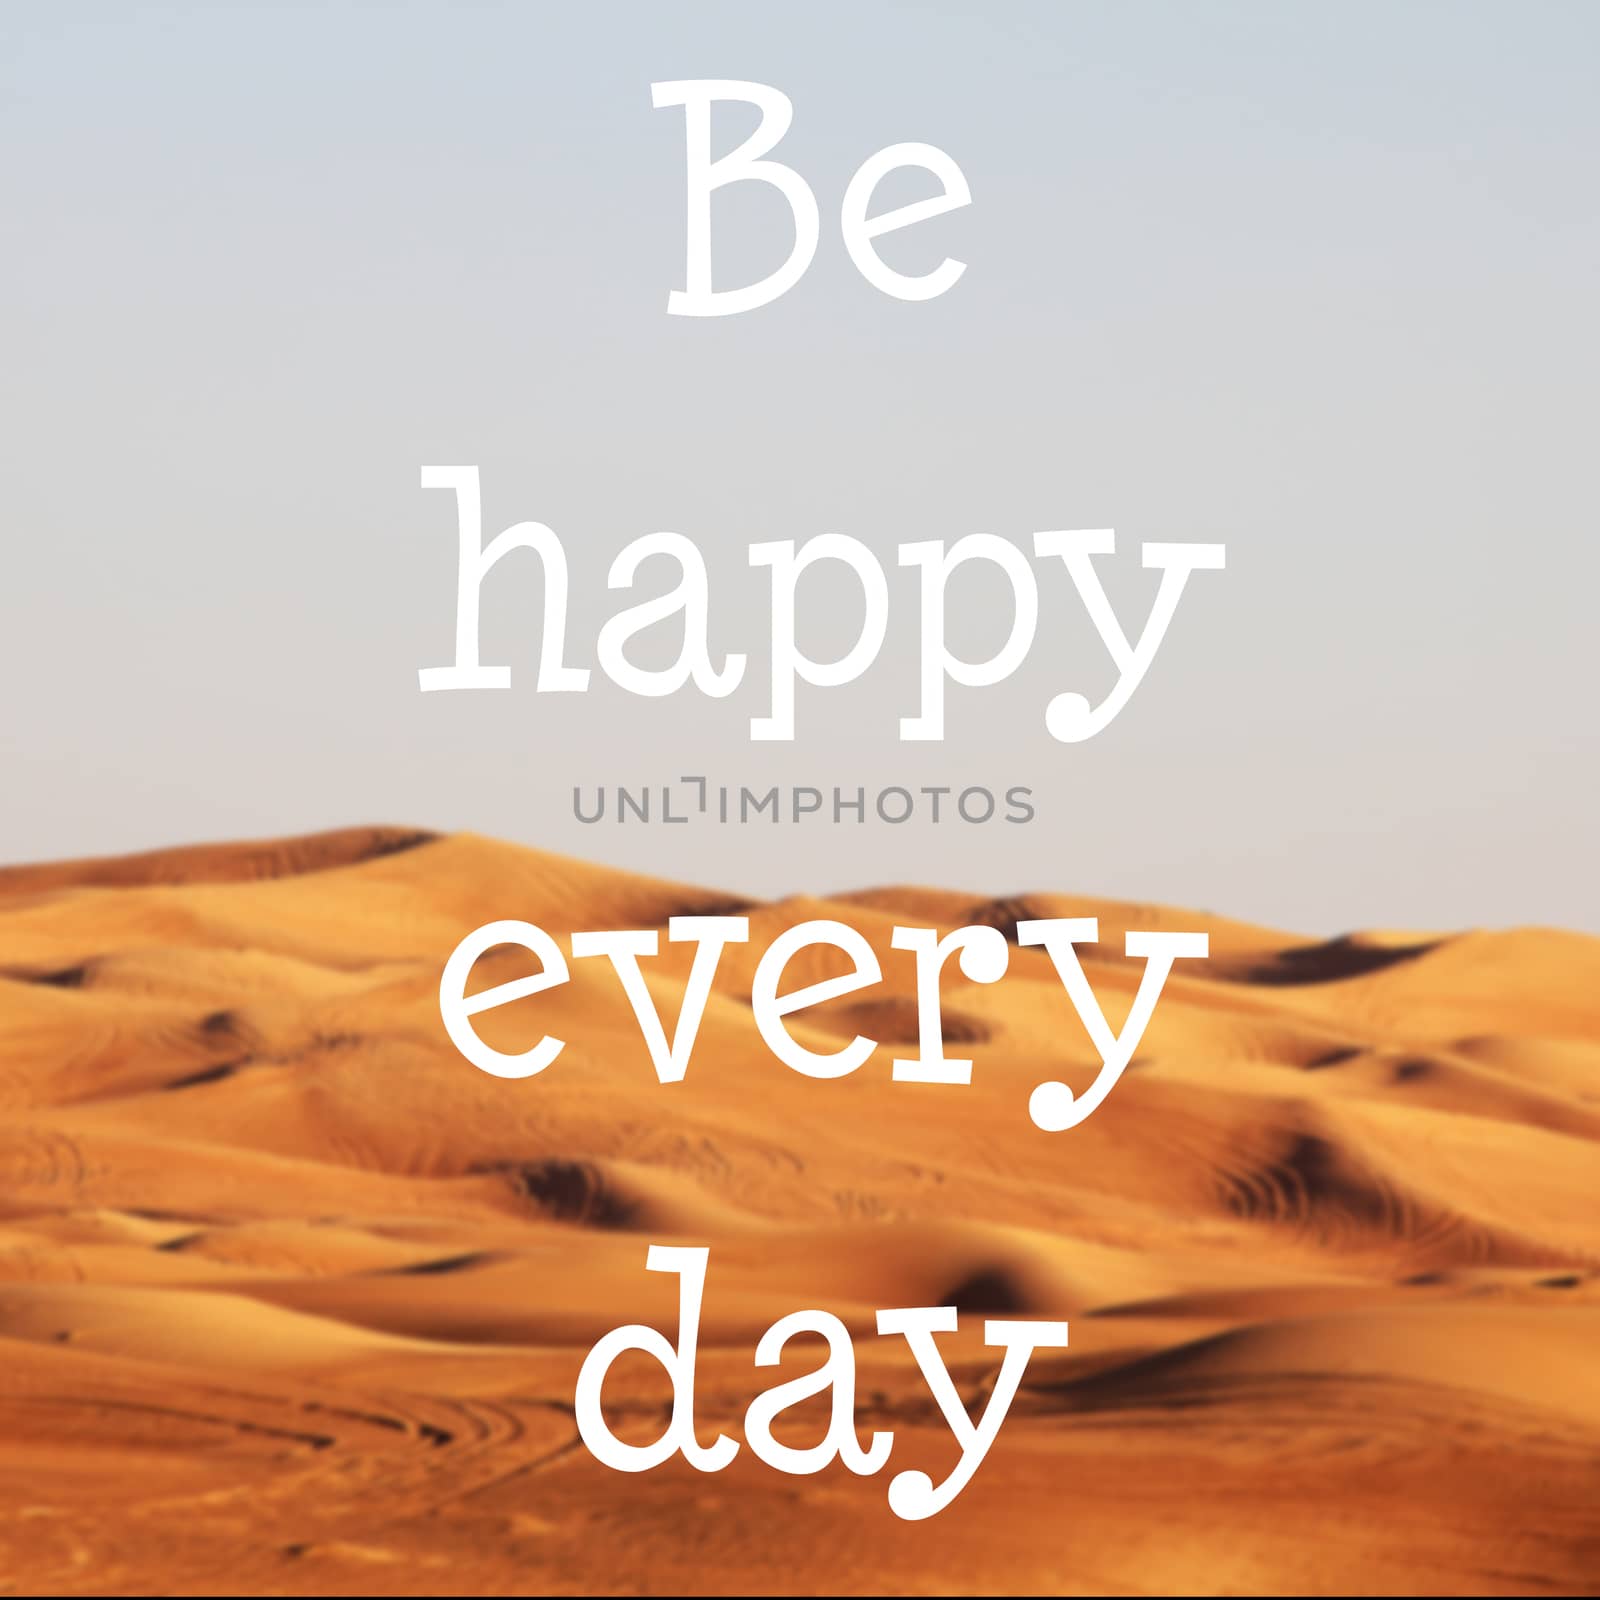 Blured desert with text: Be happy every day by Voinakh